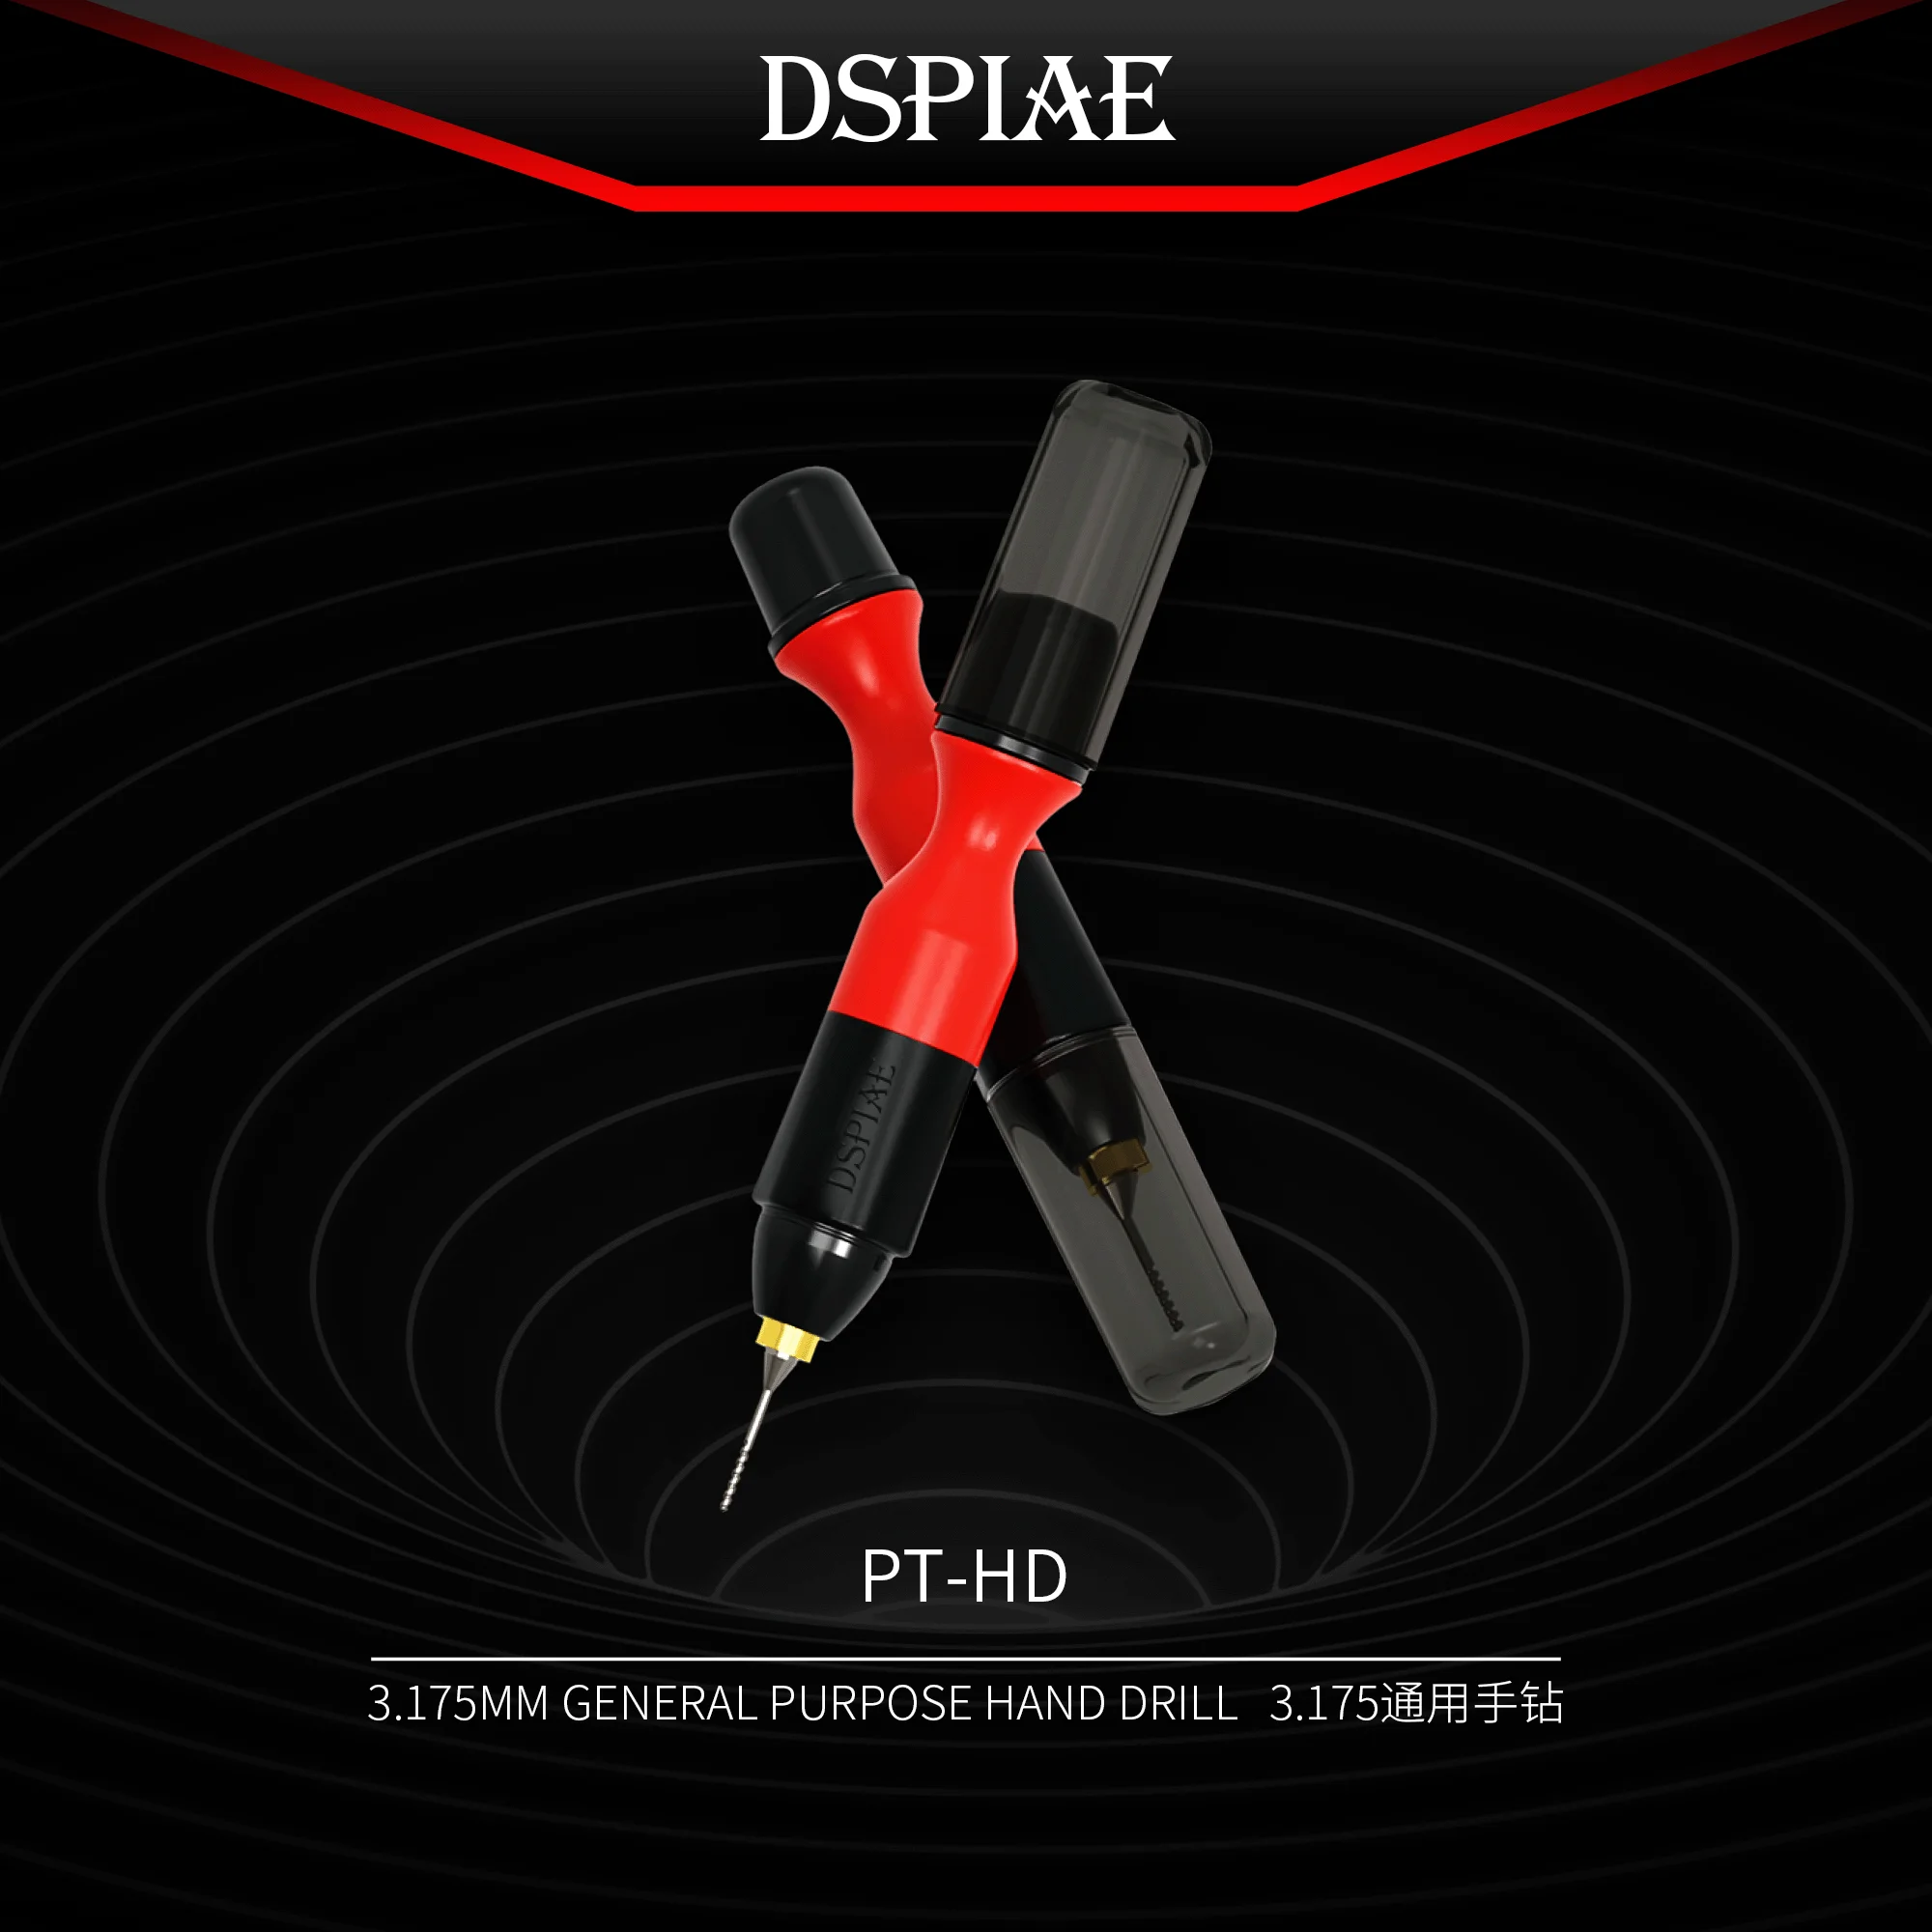 

DSPIAE PT-HD 3.175mm General Purpose Hand Drill DIY Supplies Power Tool Pen Type Mini with 0.5/0.8/1.0/1.5/2.0 mm Machine Drill